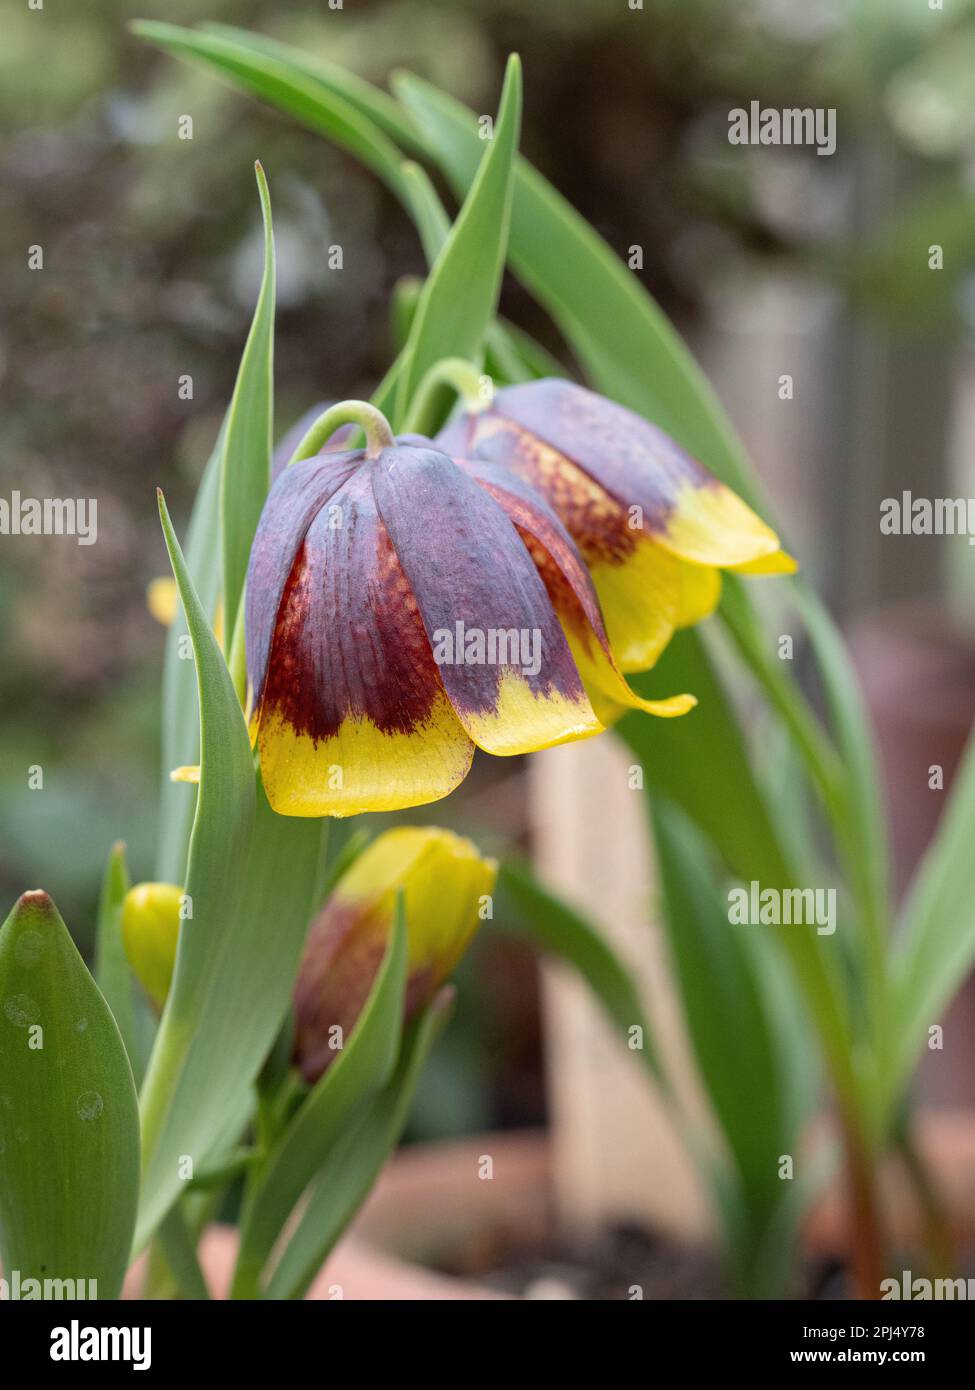 The chocolate and yellow up turned bell flowers of Fritillaria uva-vulpis Stock Photo